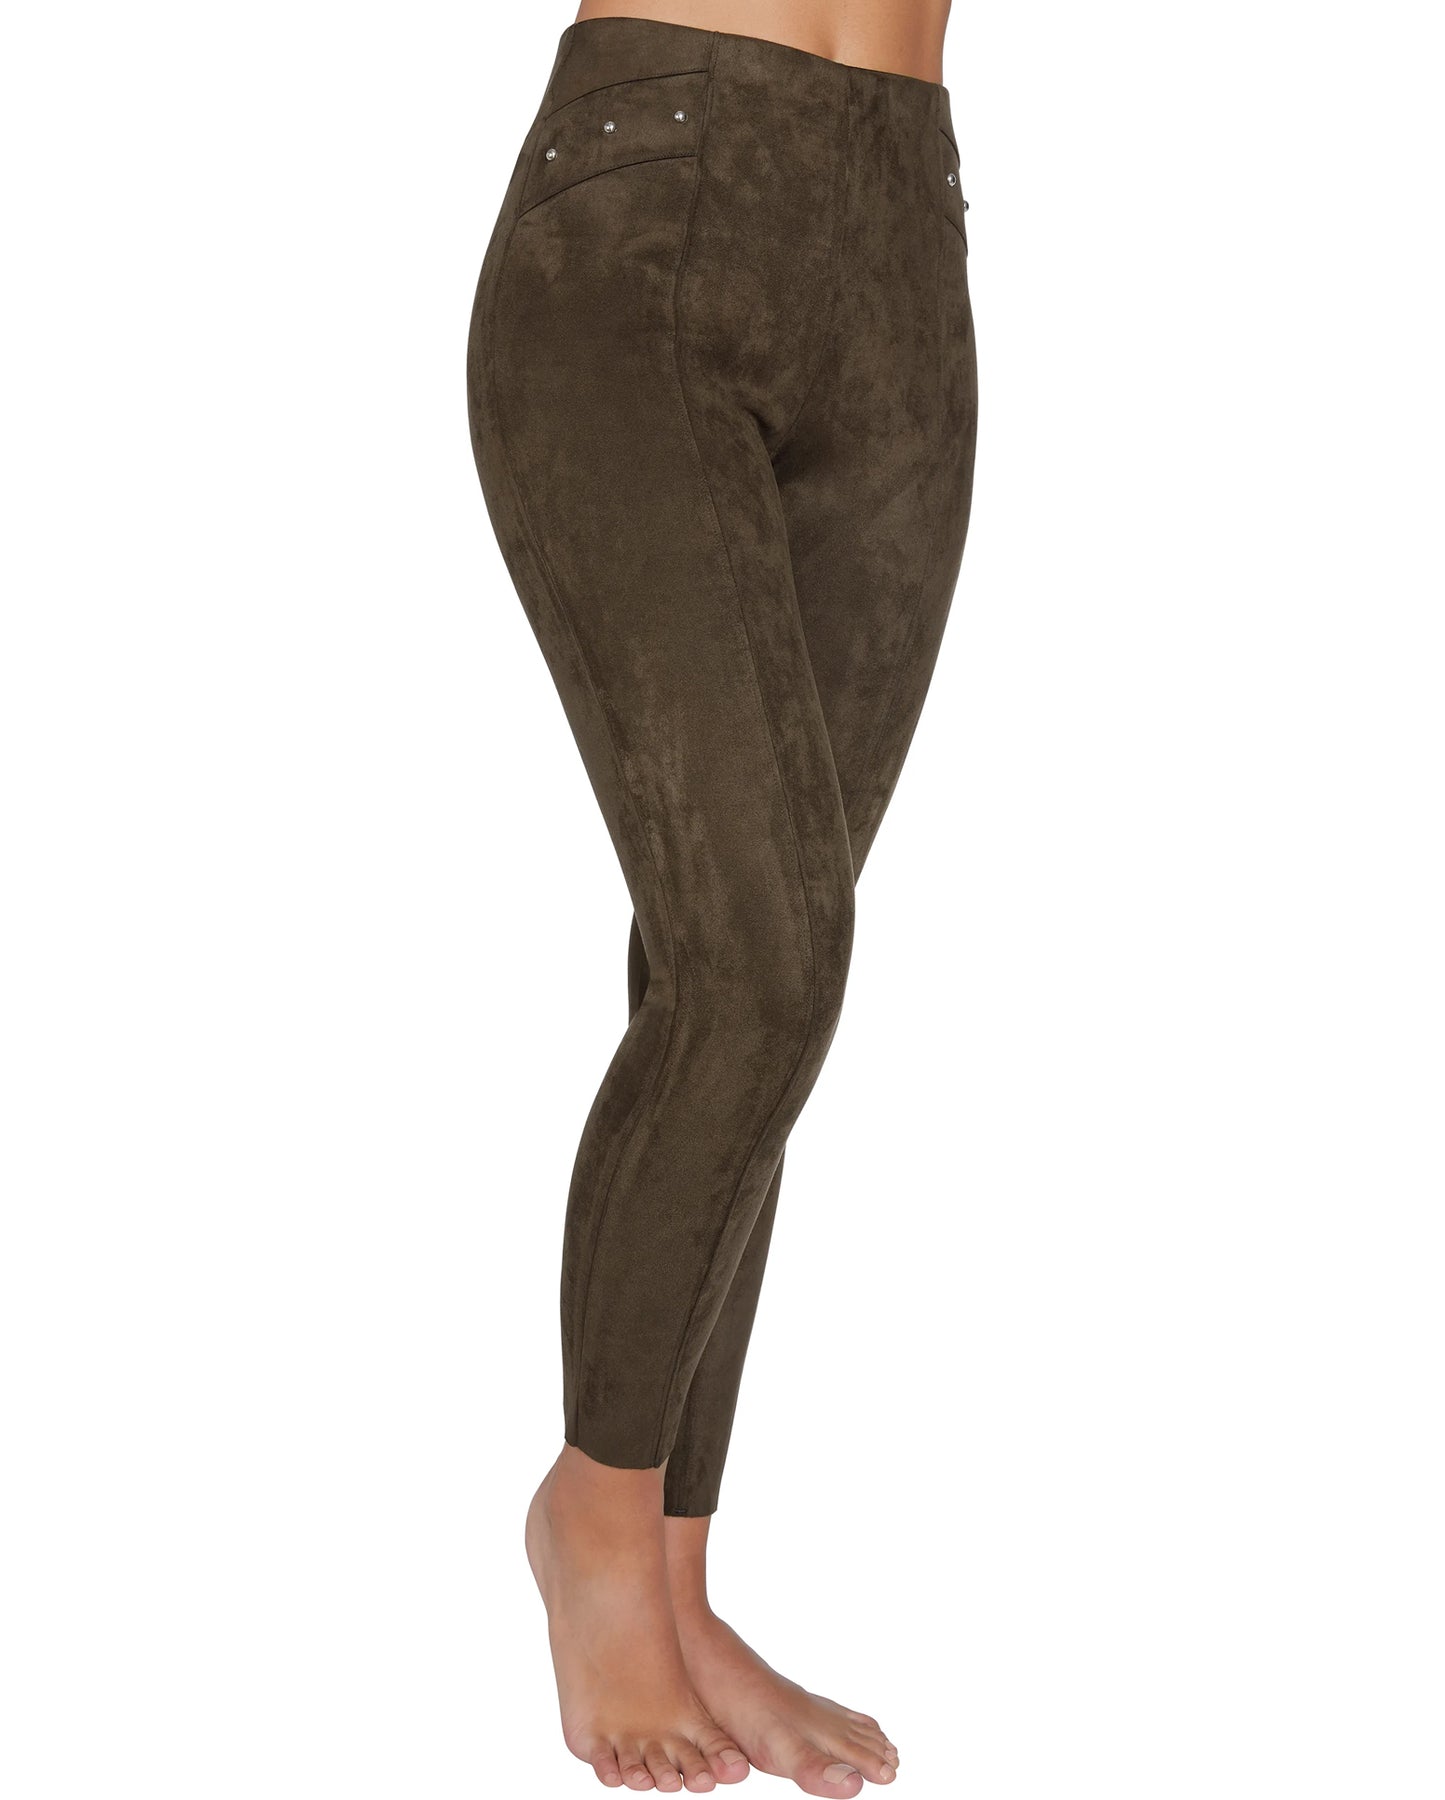 Ysabel Mora 70258 Suede Effect Treggings - brown high waist trouser leggings in faux suede with silver studs